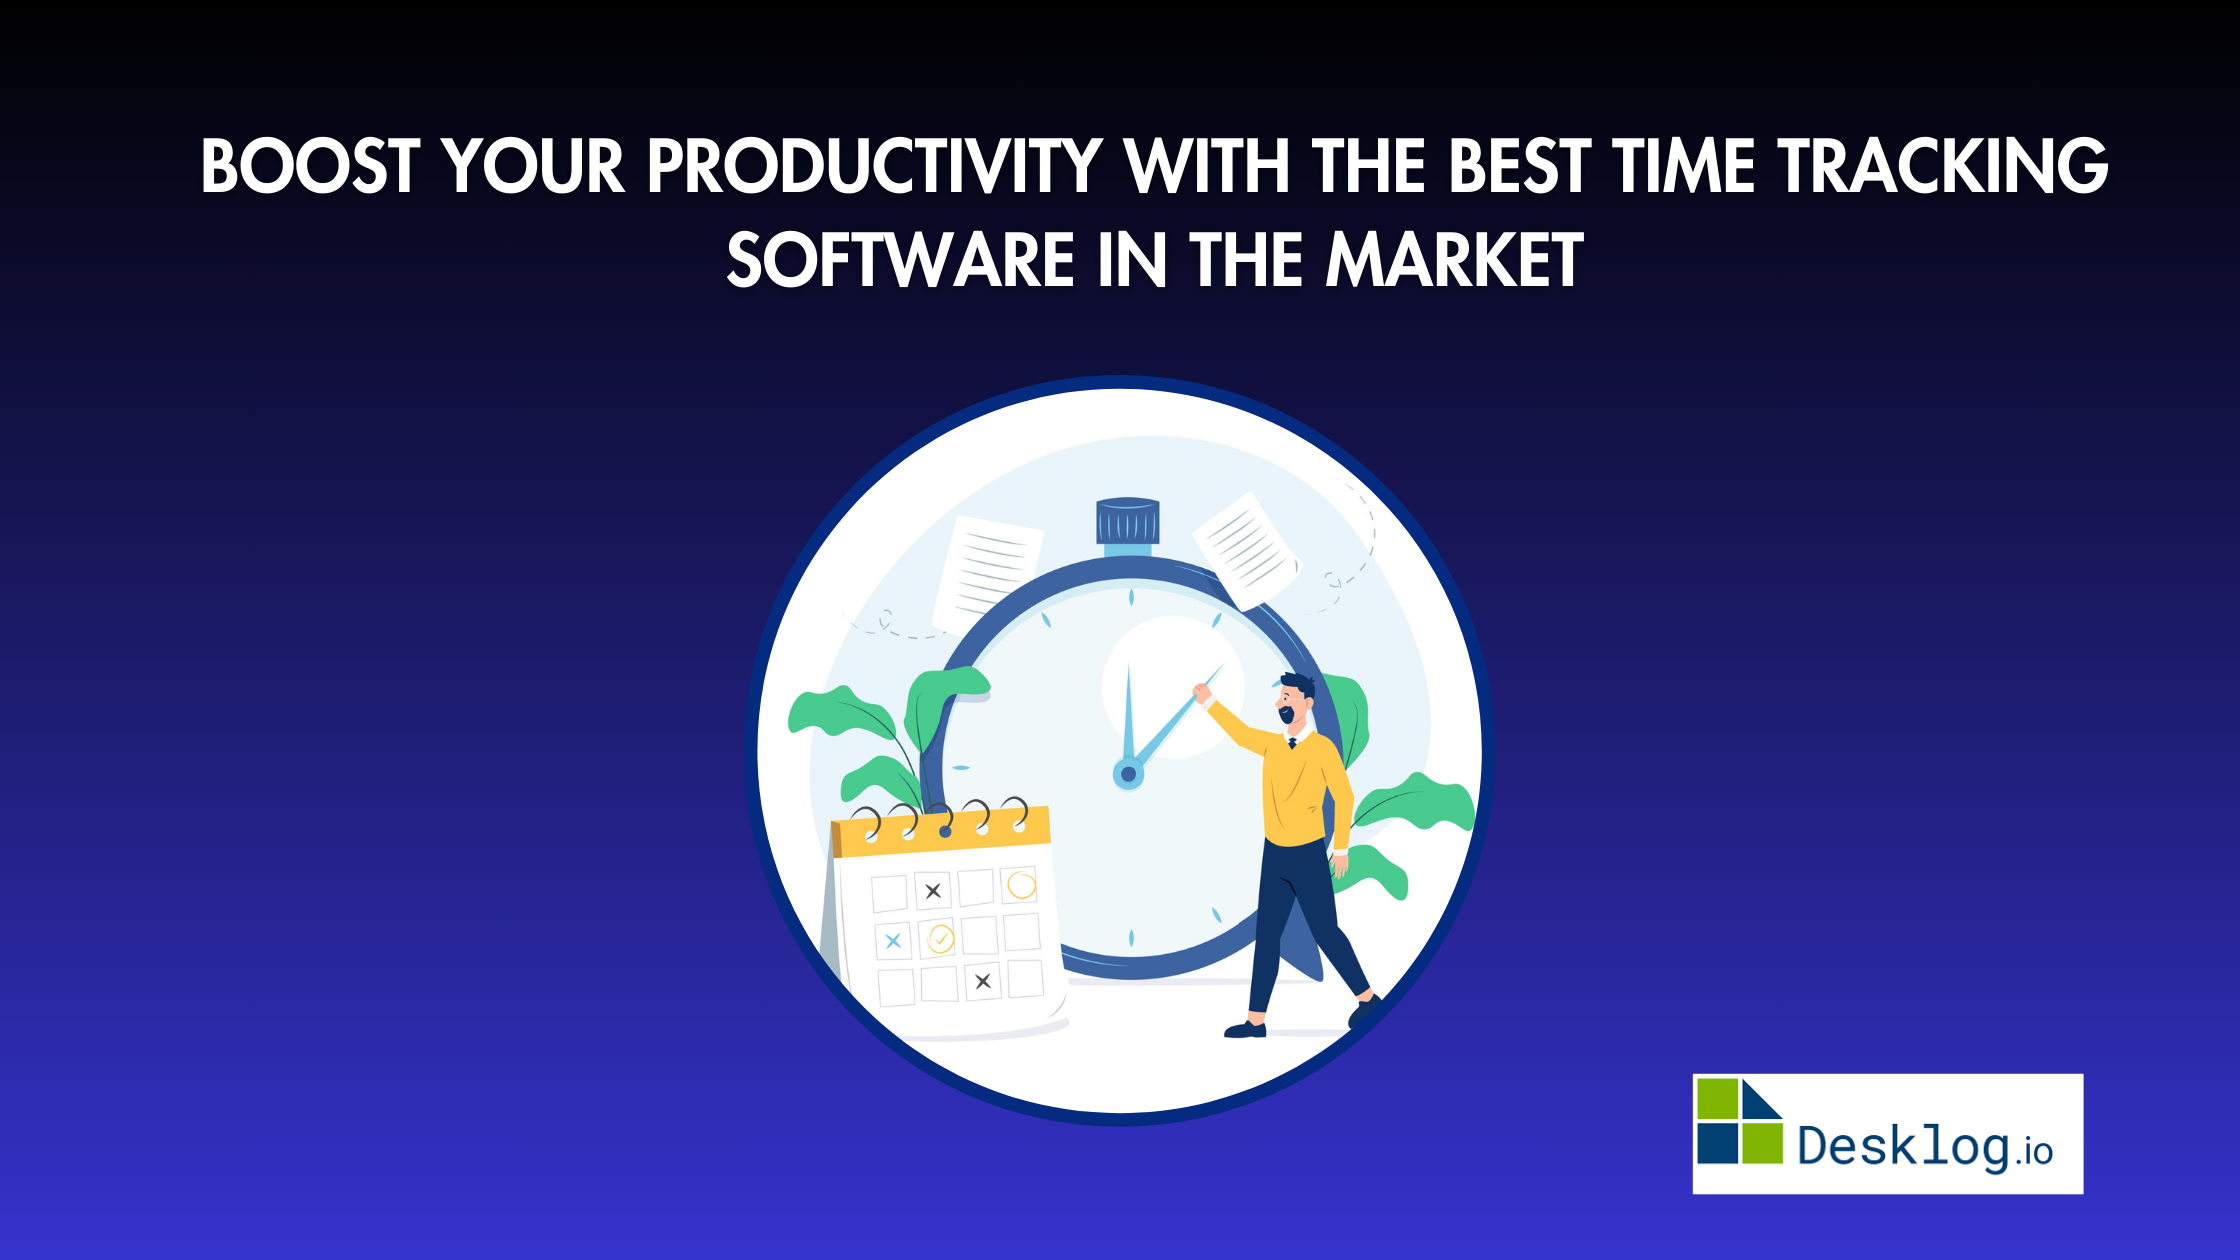 Boost Your Productivity with the Best Time Tracking Software in the Market